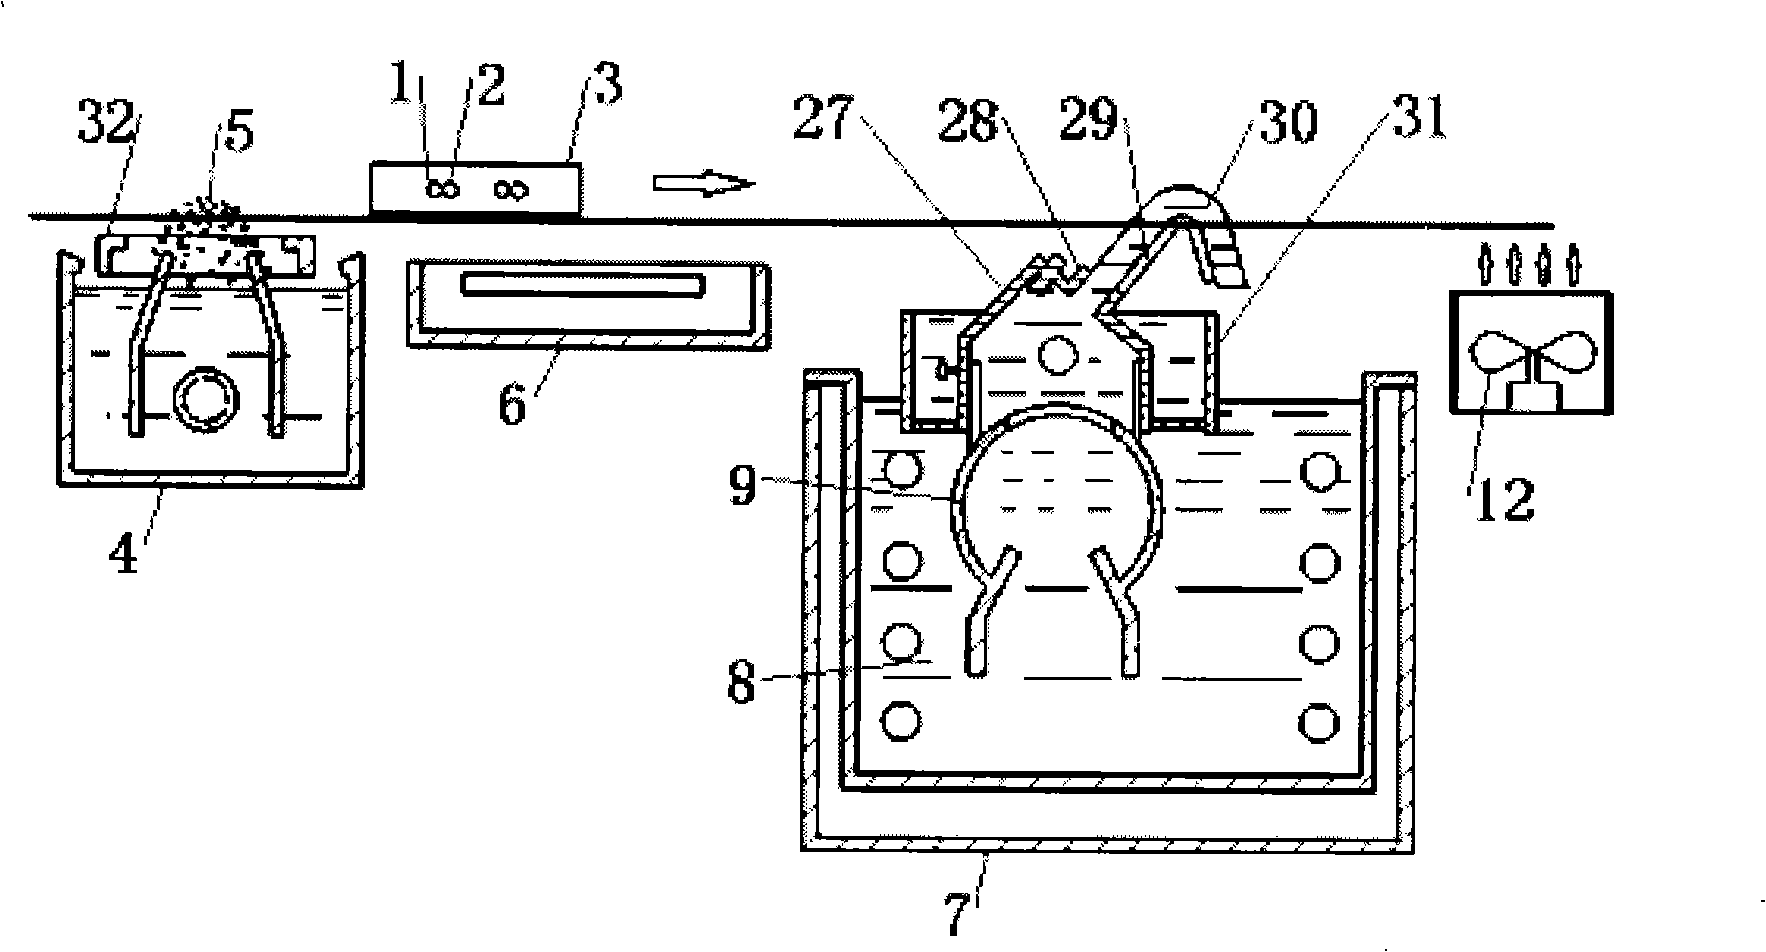 Reaction jet welding device and uses thereof